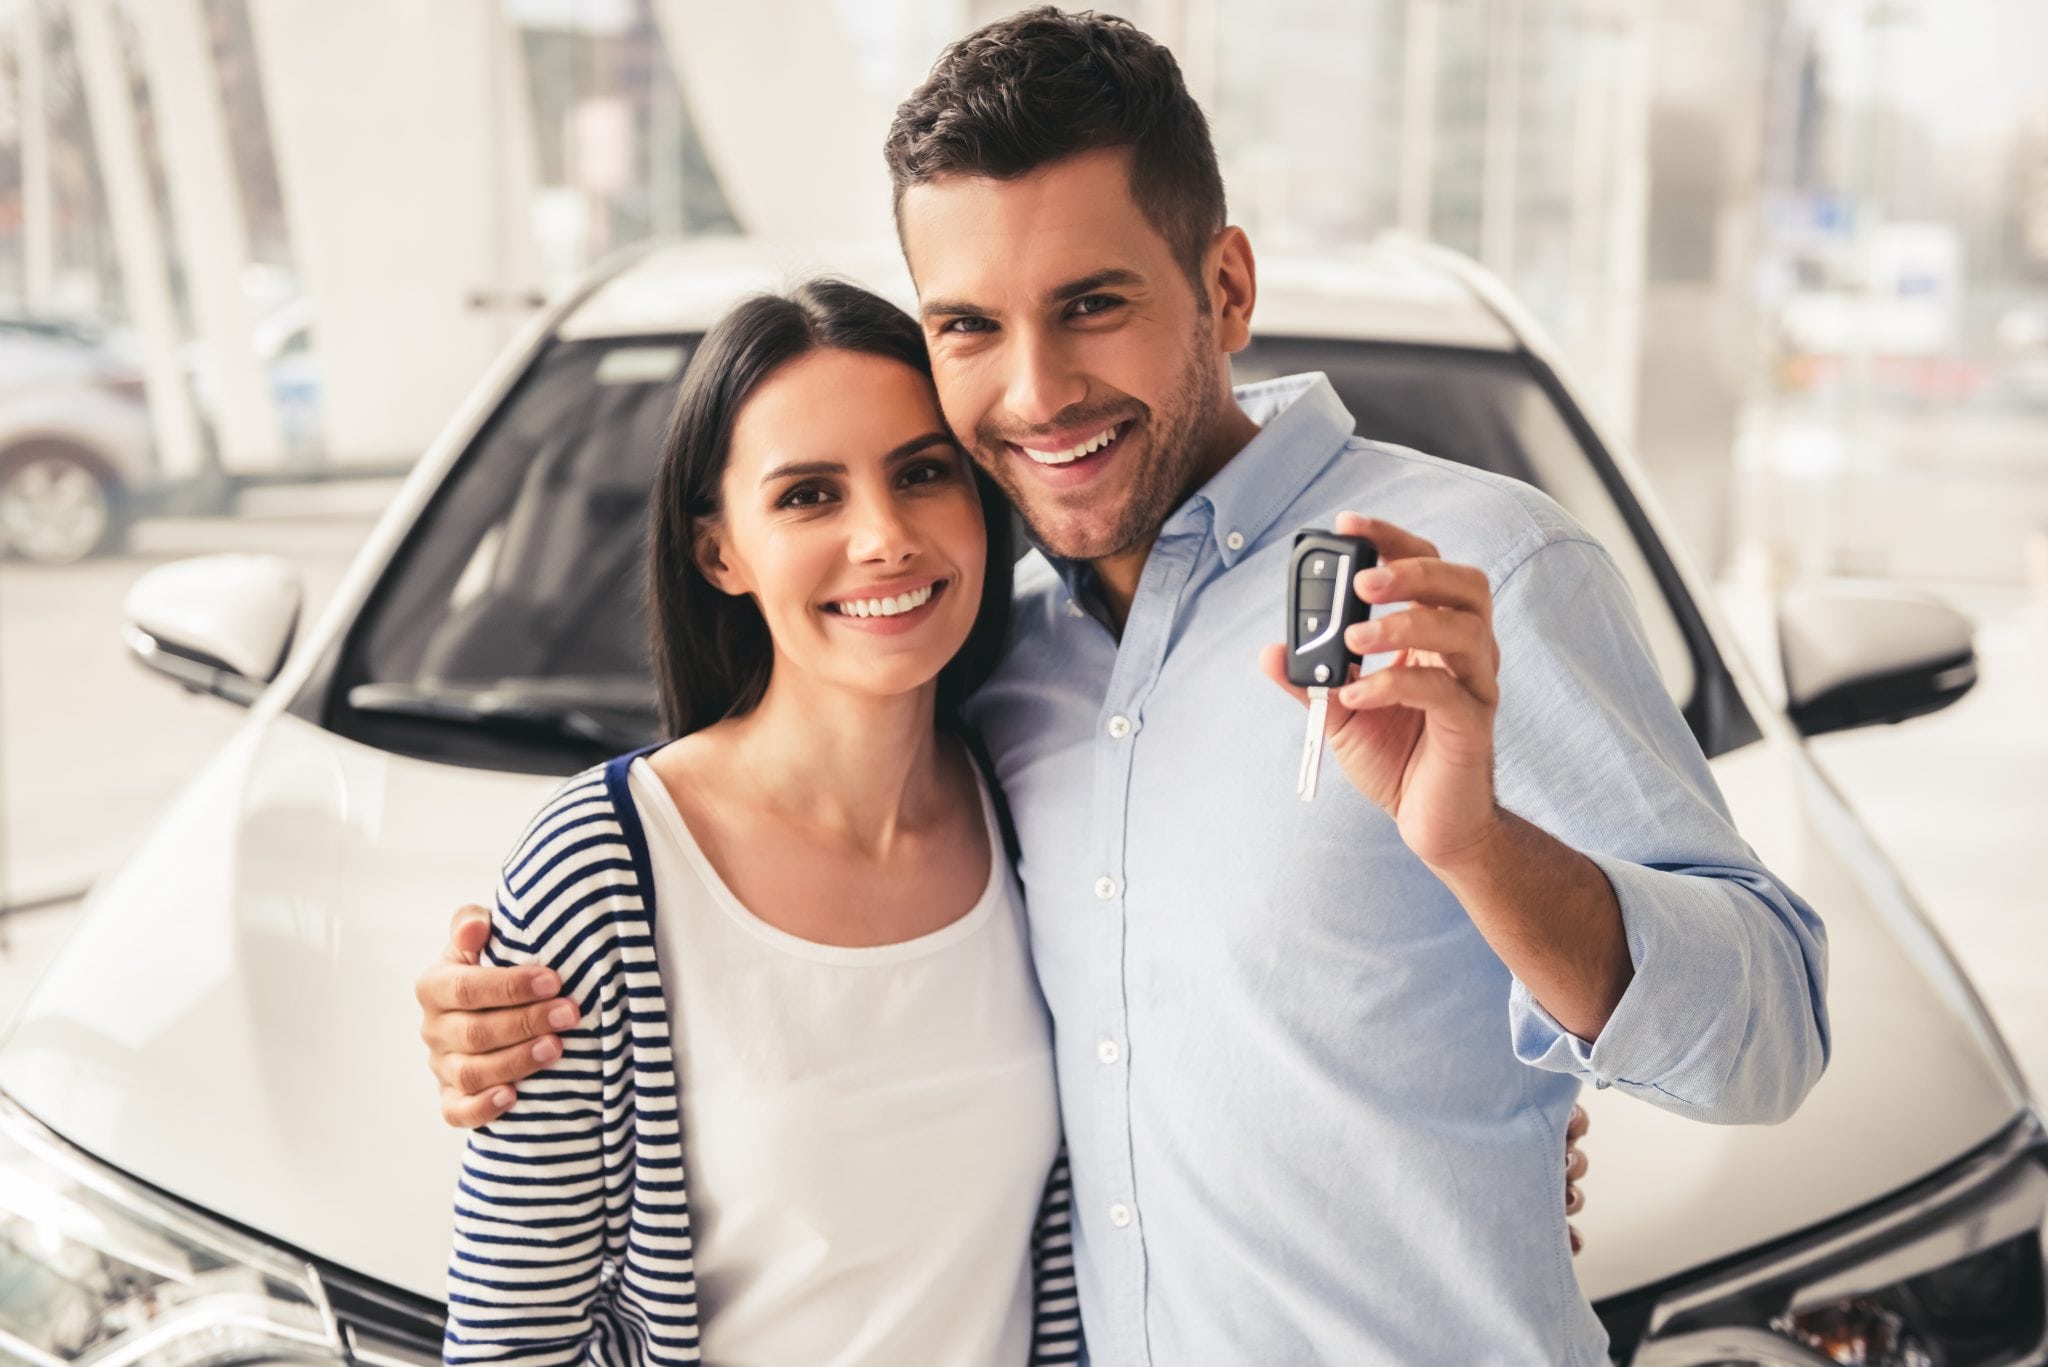 Used Cars Union City NJ: 10 Scenarios It’s Time to Get a New Car